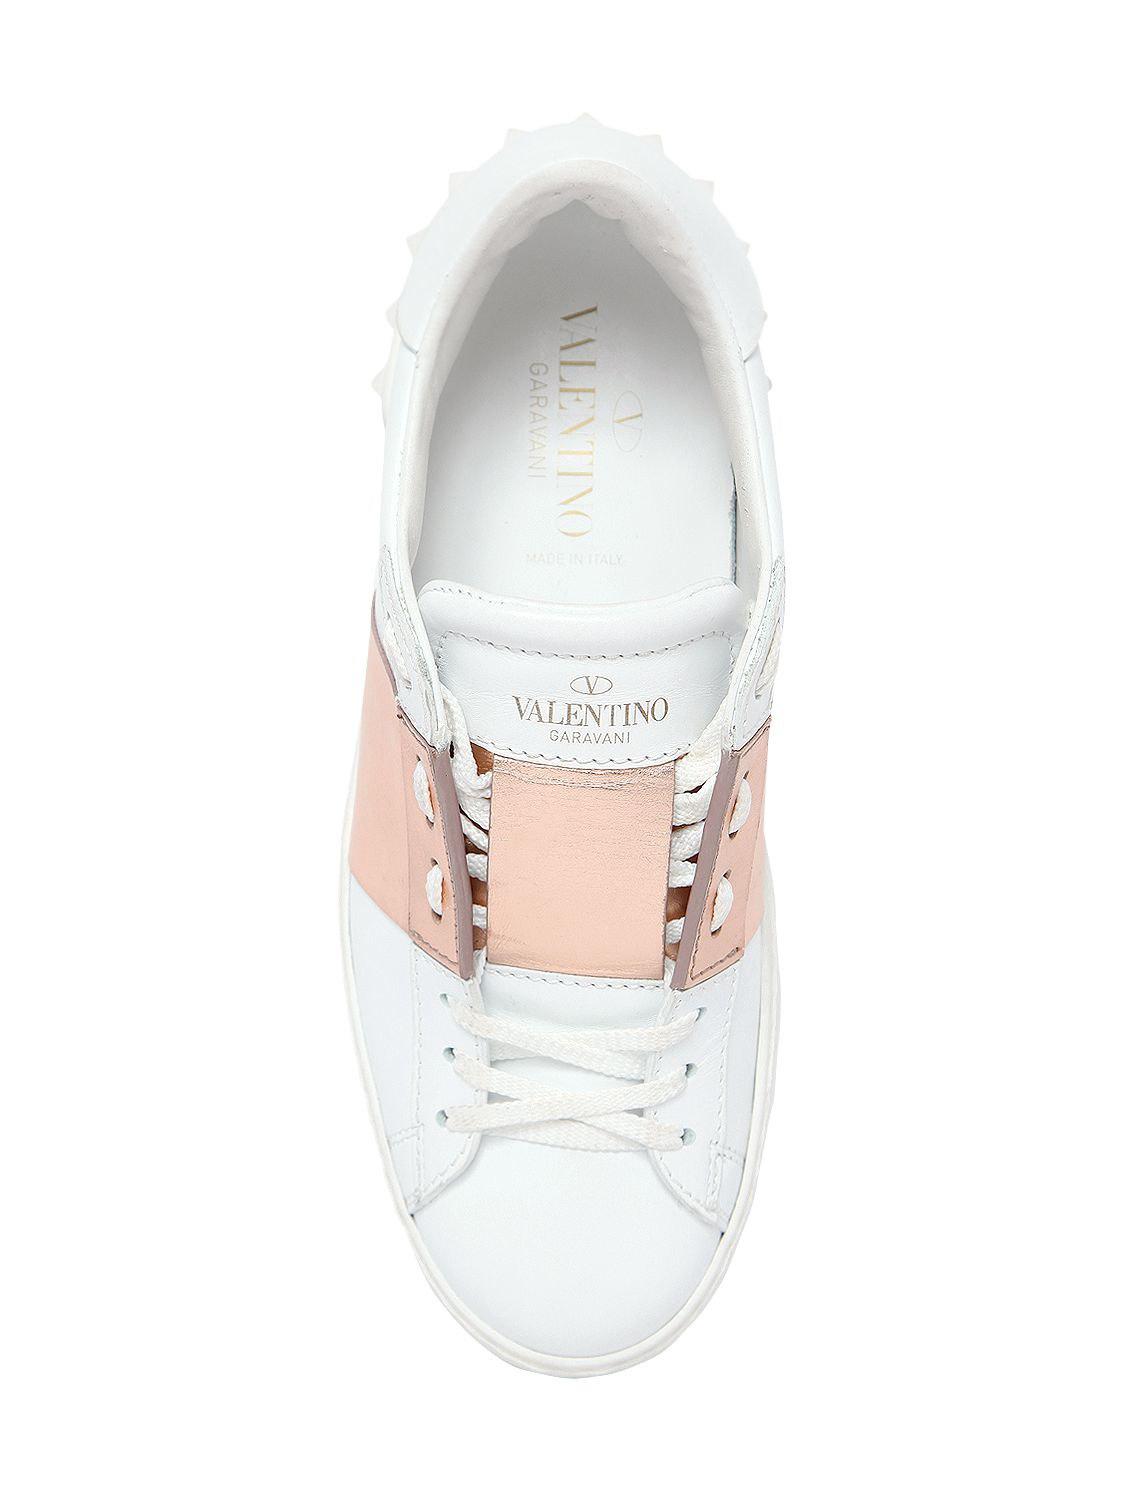 Lyst - Valentino Open Metallic Leather Sneakers in White - Save 68%